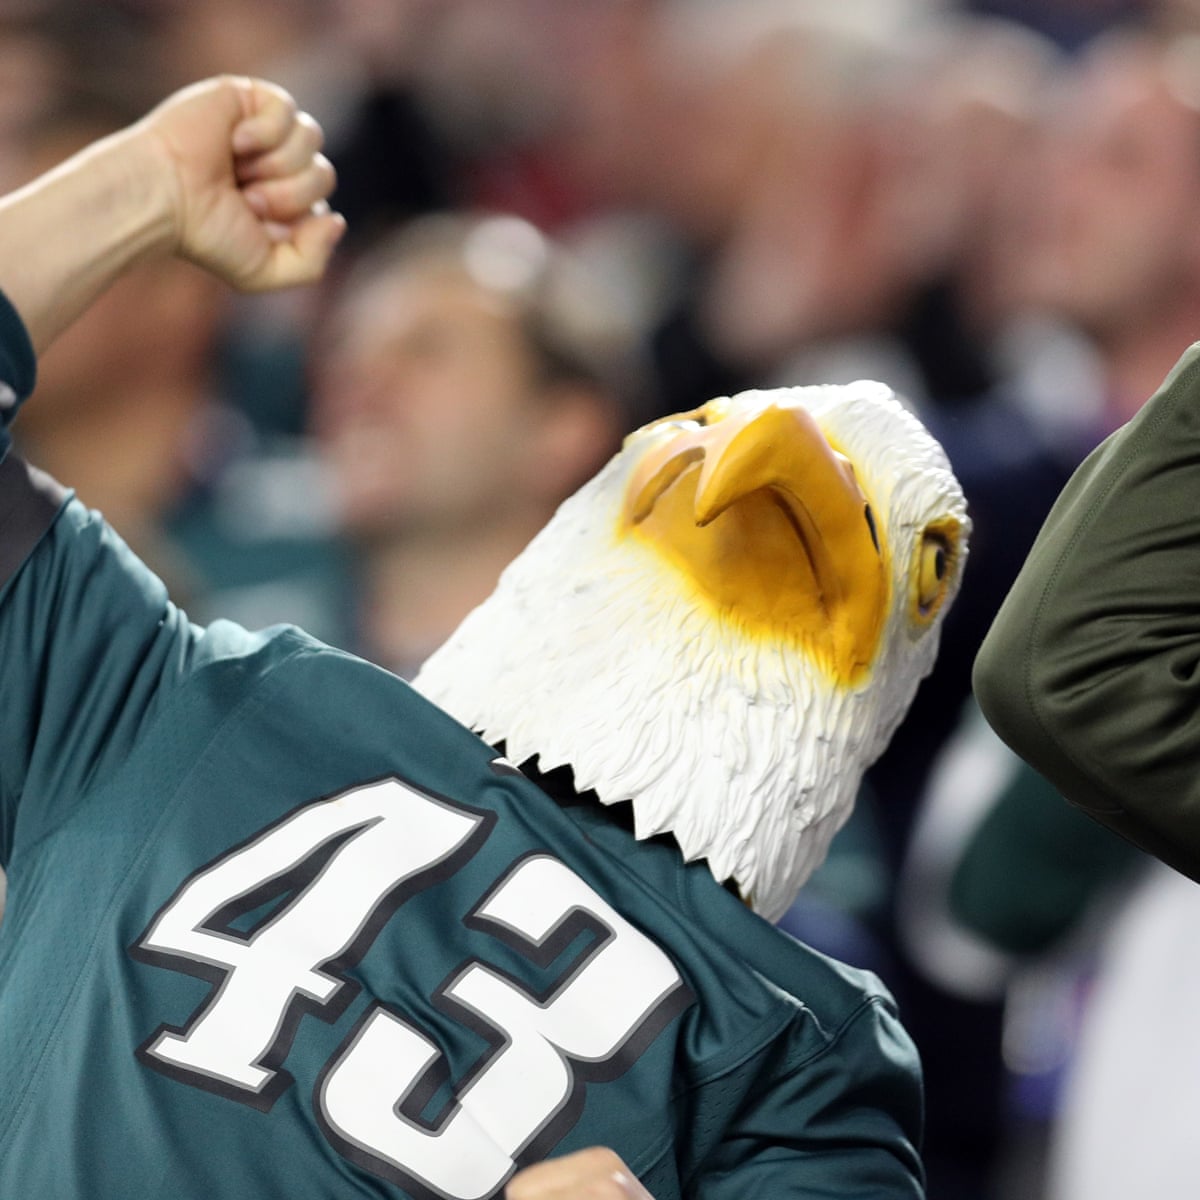 Power play: do Philadelphia Eagles fans really throw batteries on the  field?, Super Bowl